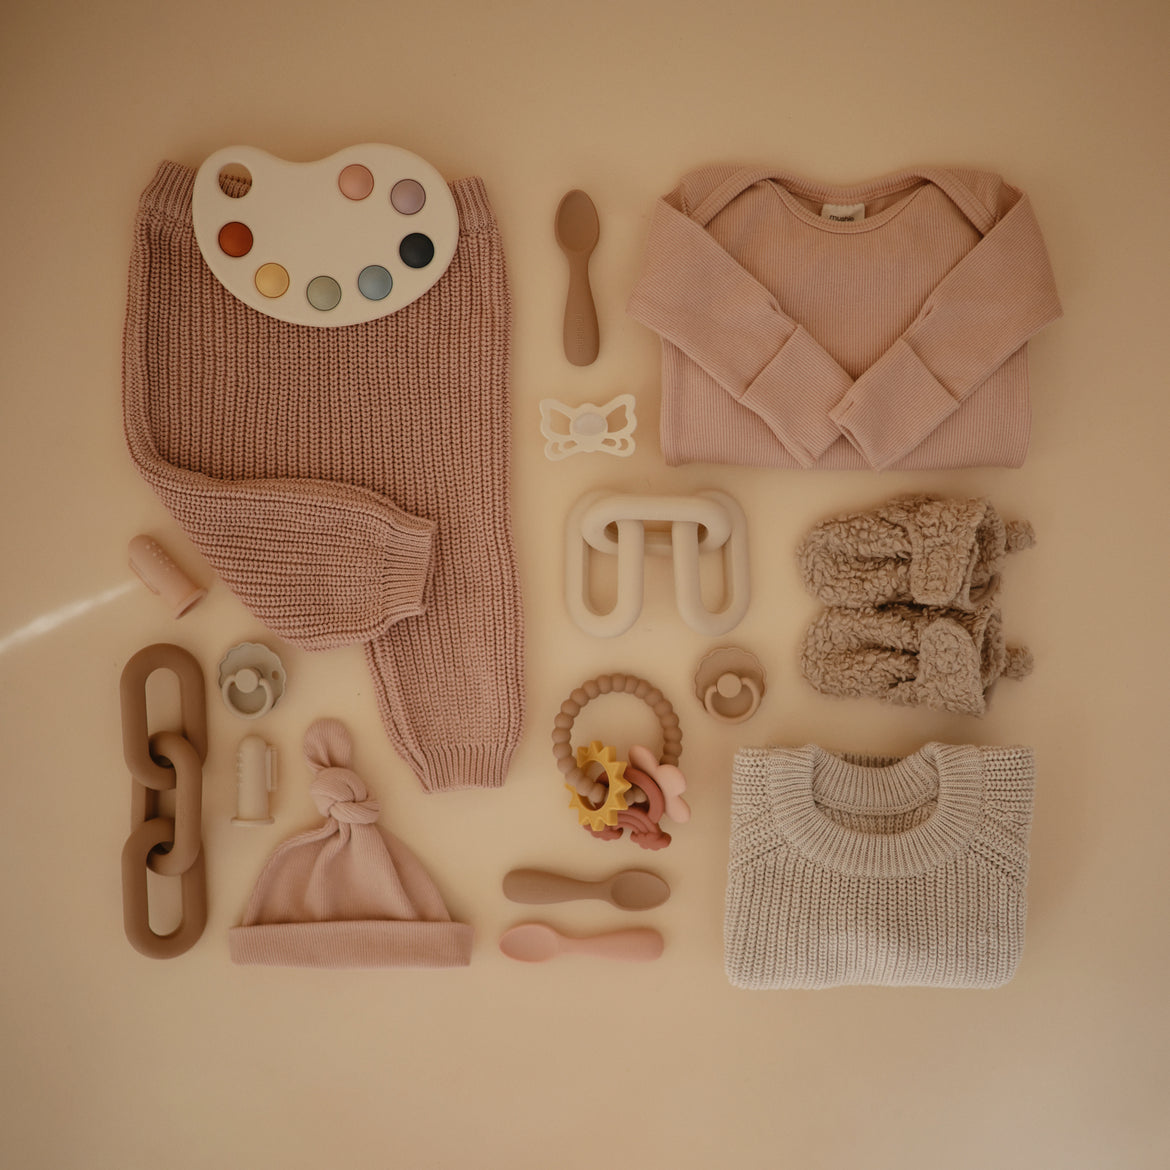 Mushie ribbed knotted baby gown and hat set -blush